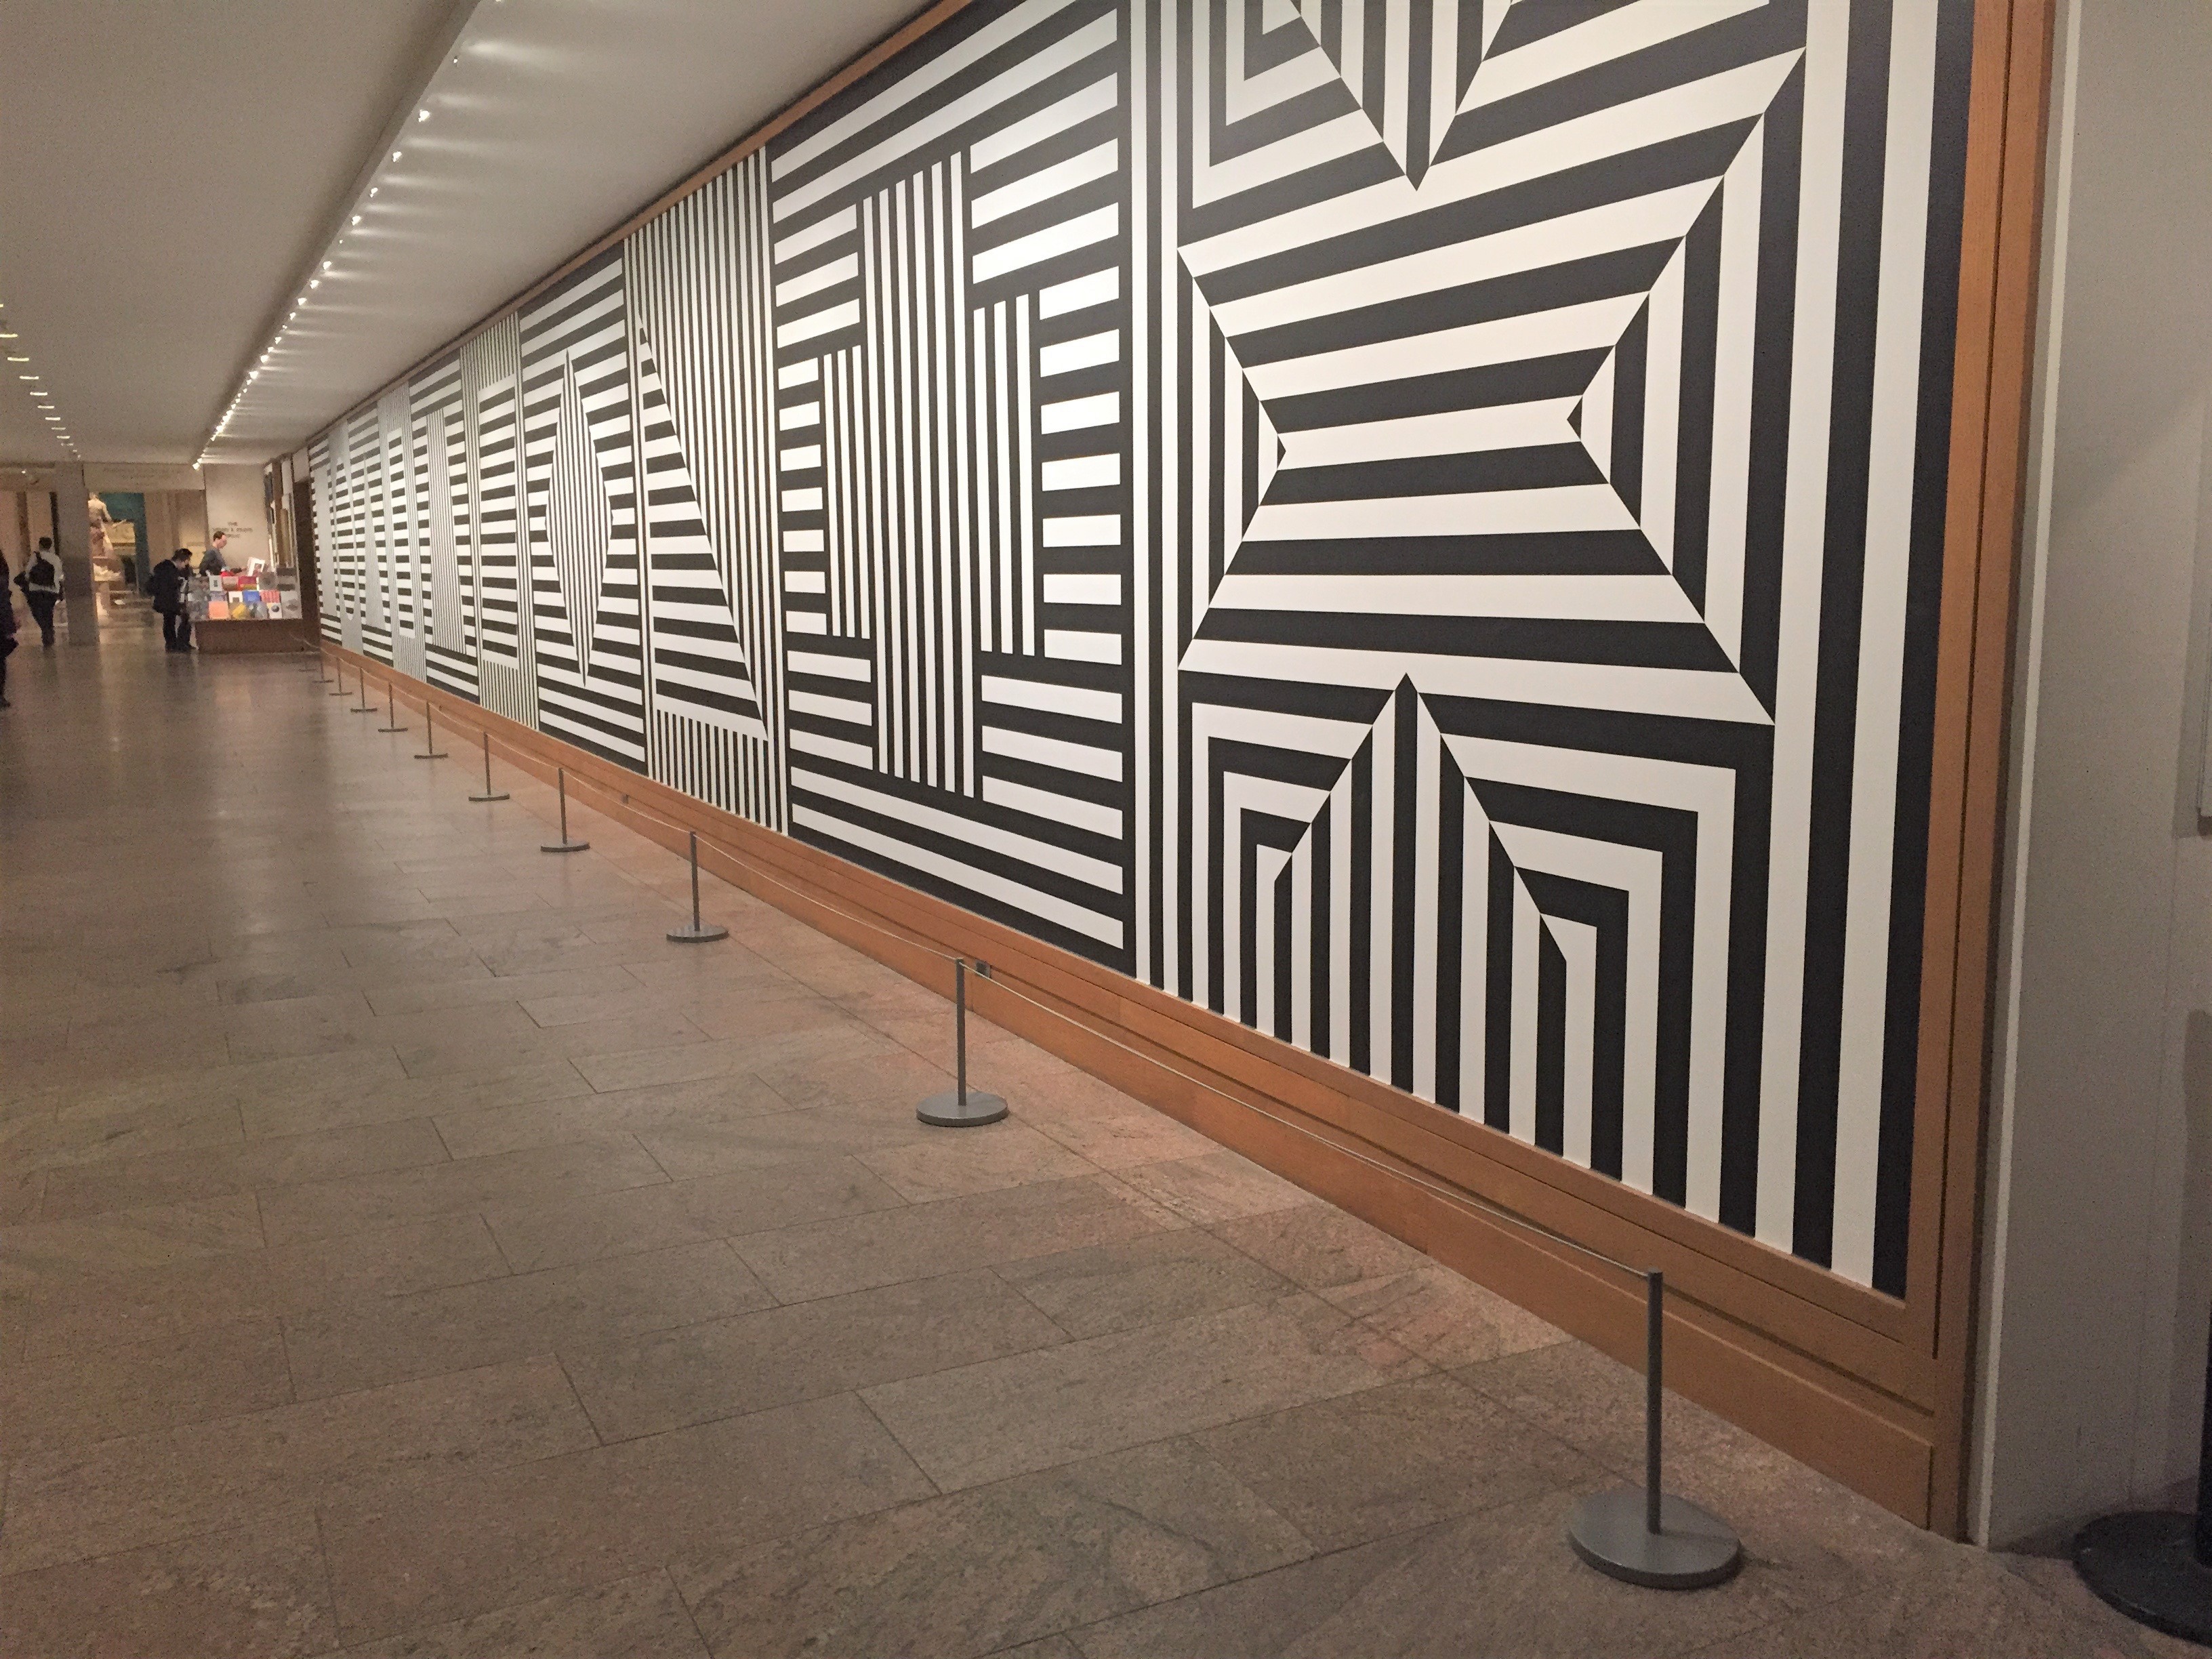 Freestanding Art Barrier 400mm, grey finish, in use at The Met, New York